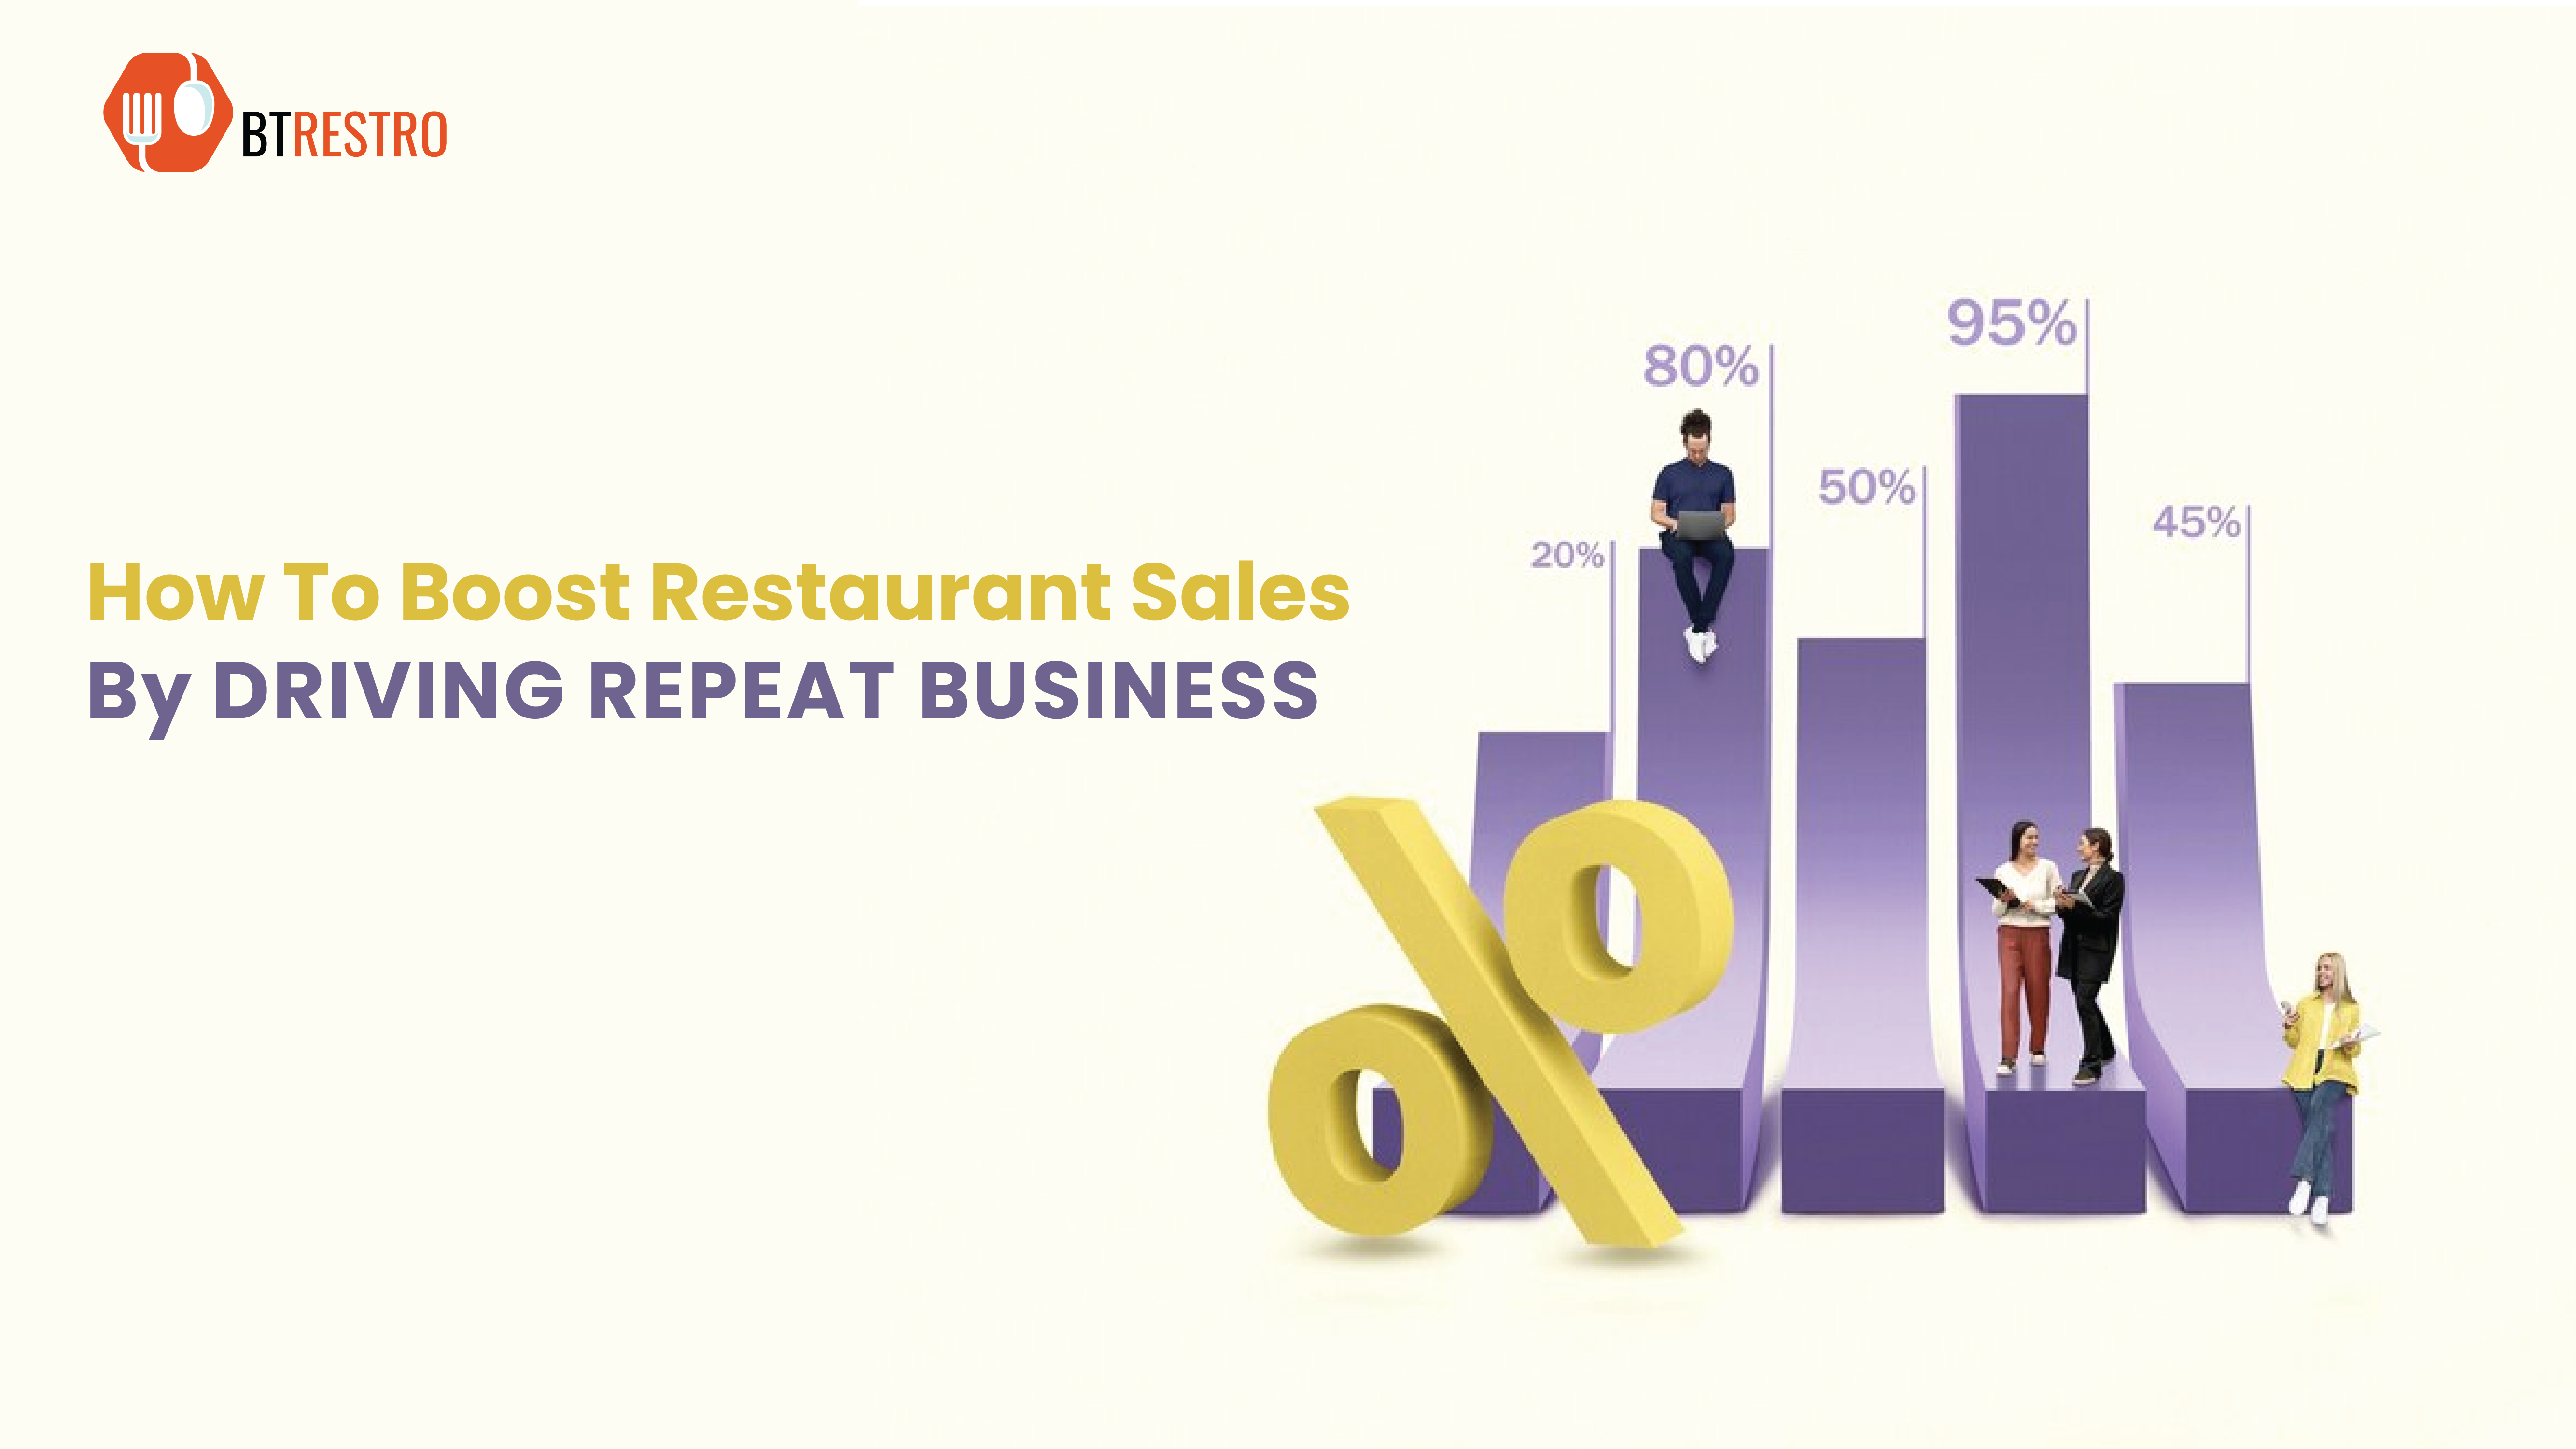 How To Boost Restaurant Sales By Driving Repeat Business